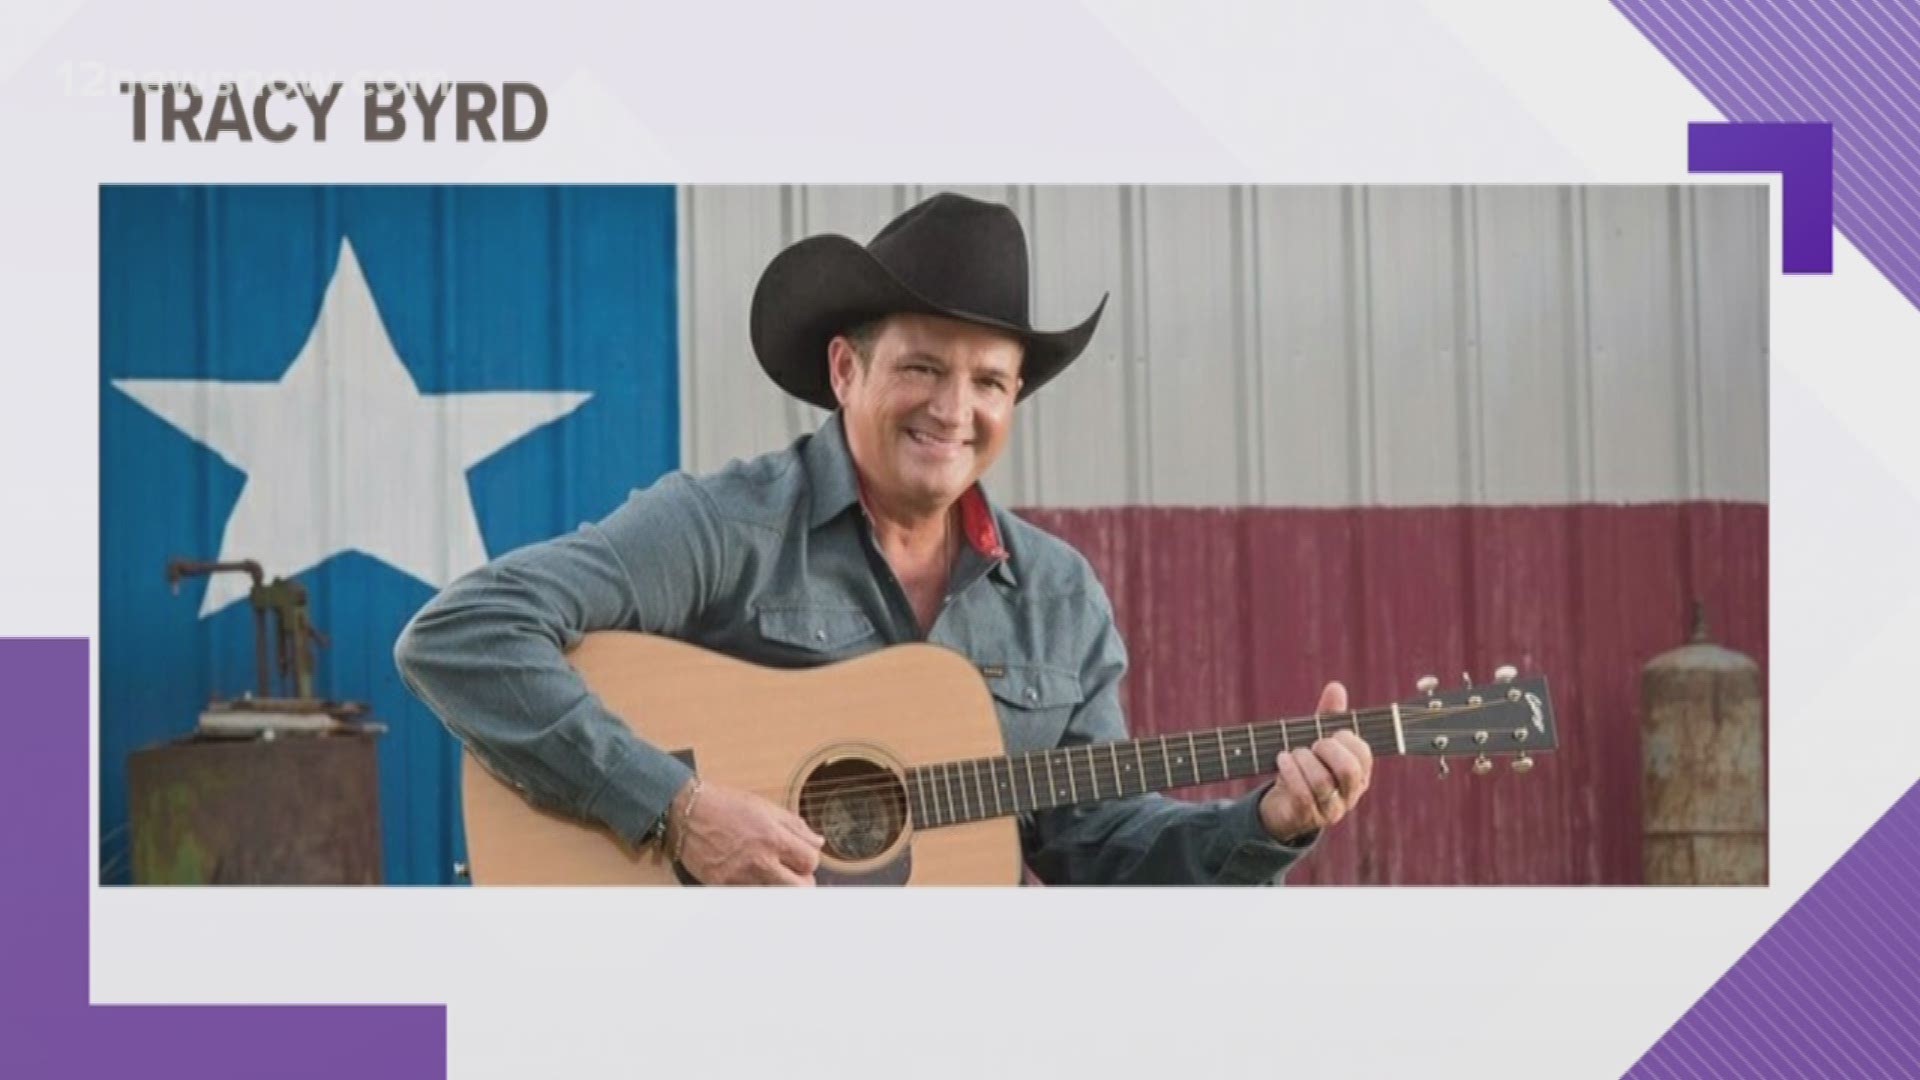 Byrd, a Vidor native, will be performing in Beaumont in December at Jefferson Theatre.